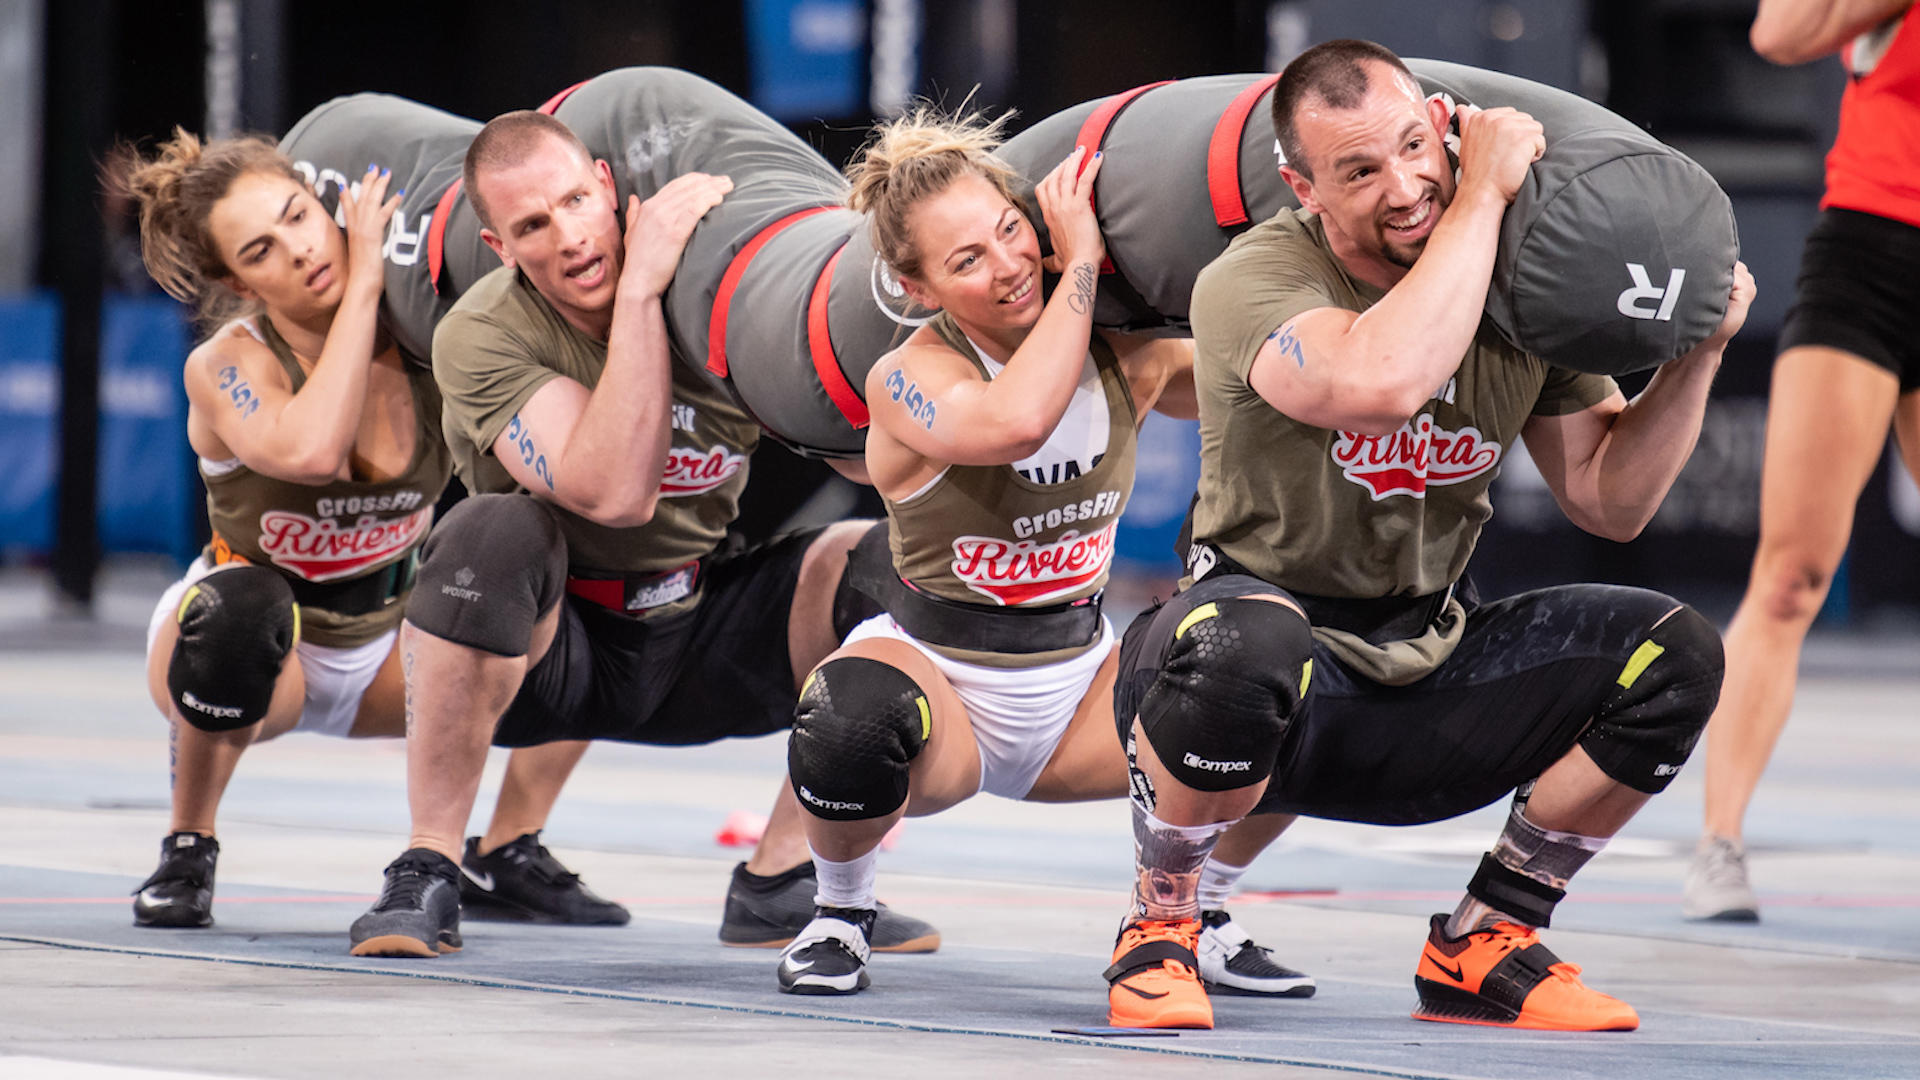 Crossfit Games Your Guide to Who's Competing in the 2016 CrossFit